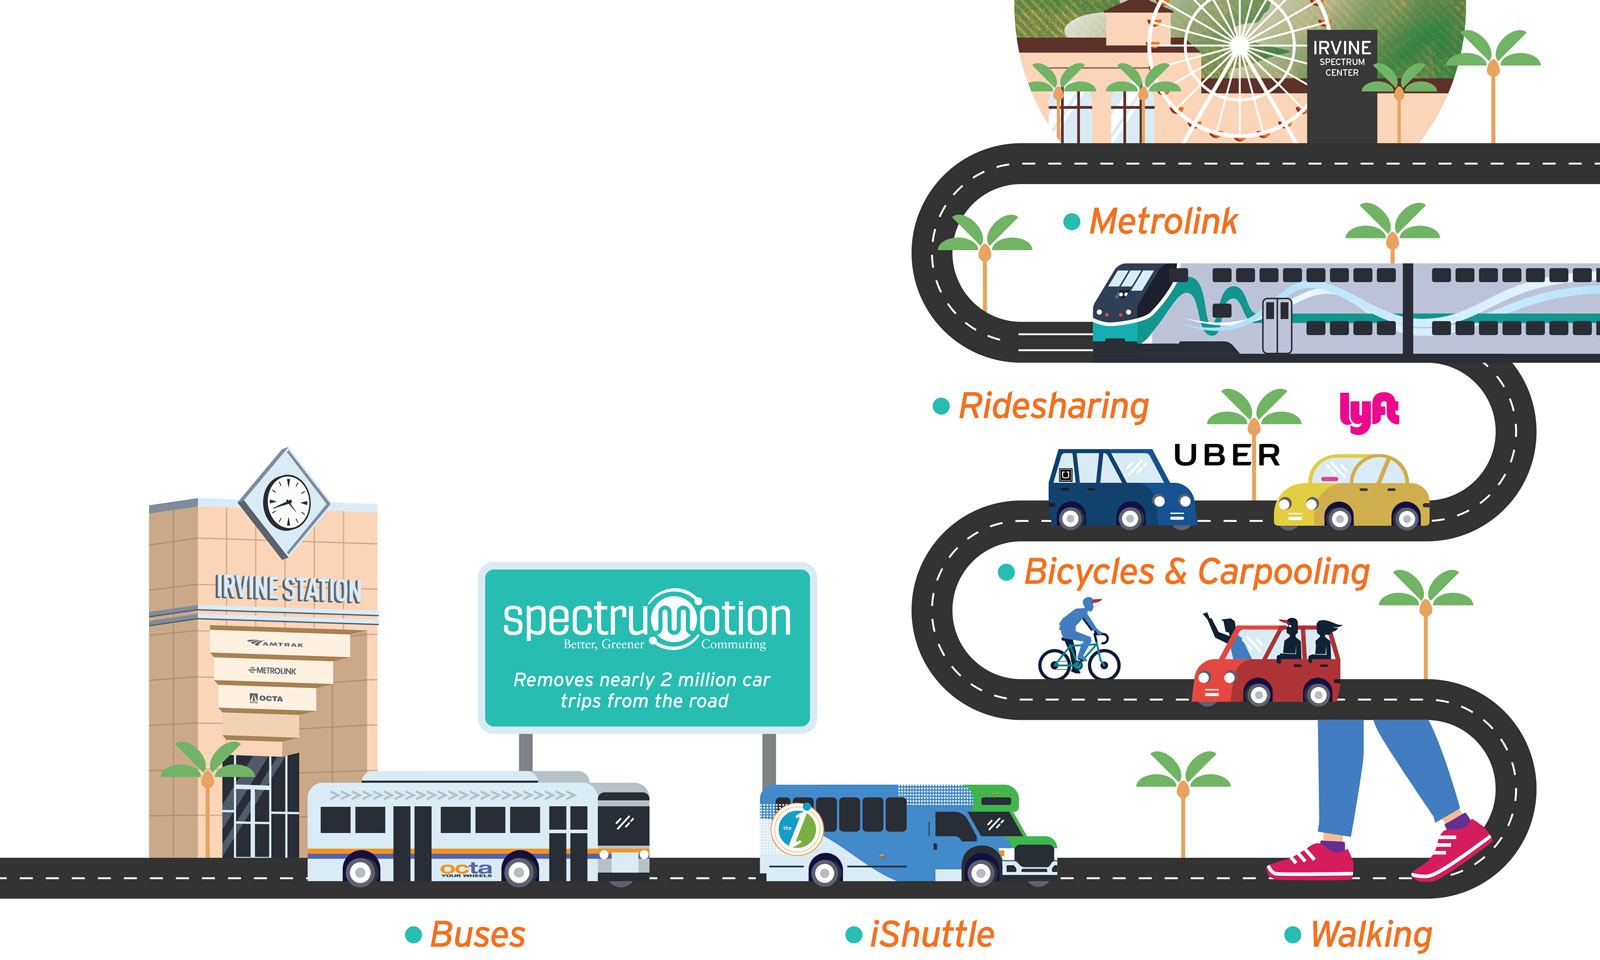 Spectrumotion makes nearly 2 million car trips disappear every year